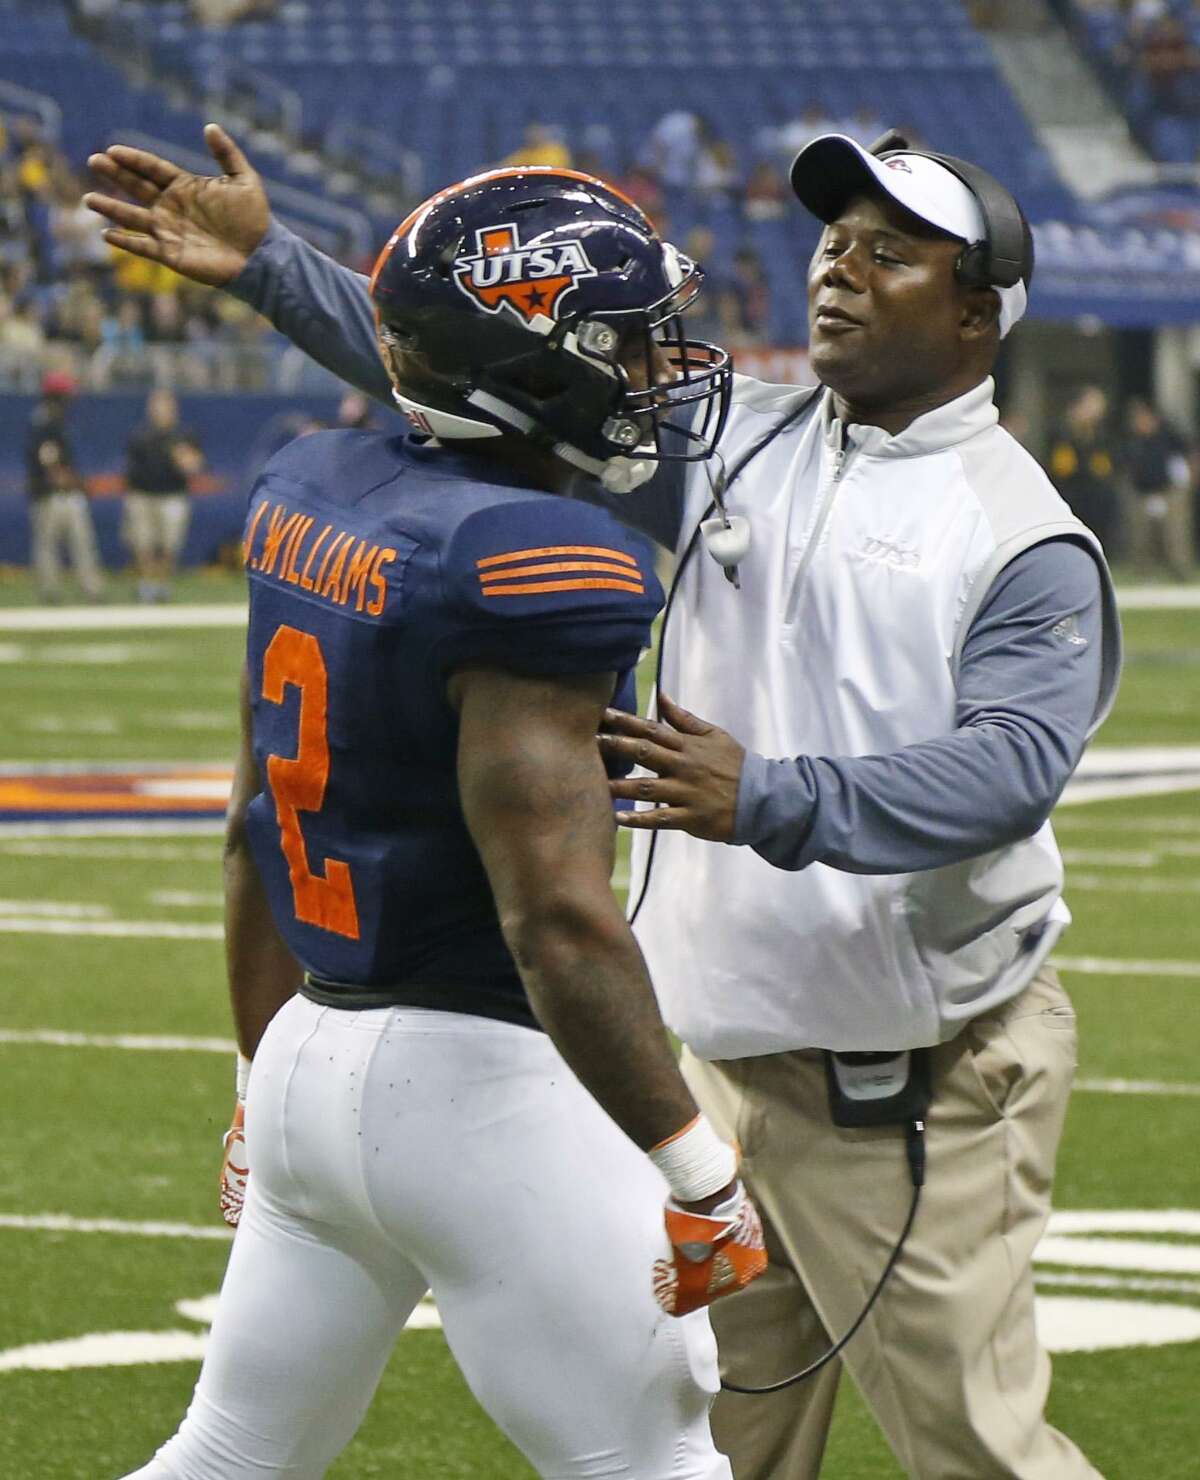 UTSA coach Frank Wilson congratulates Jarveon Williams after his TD run against Southern Miss at the Alamodome on Oct. 8, 2016.